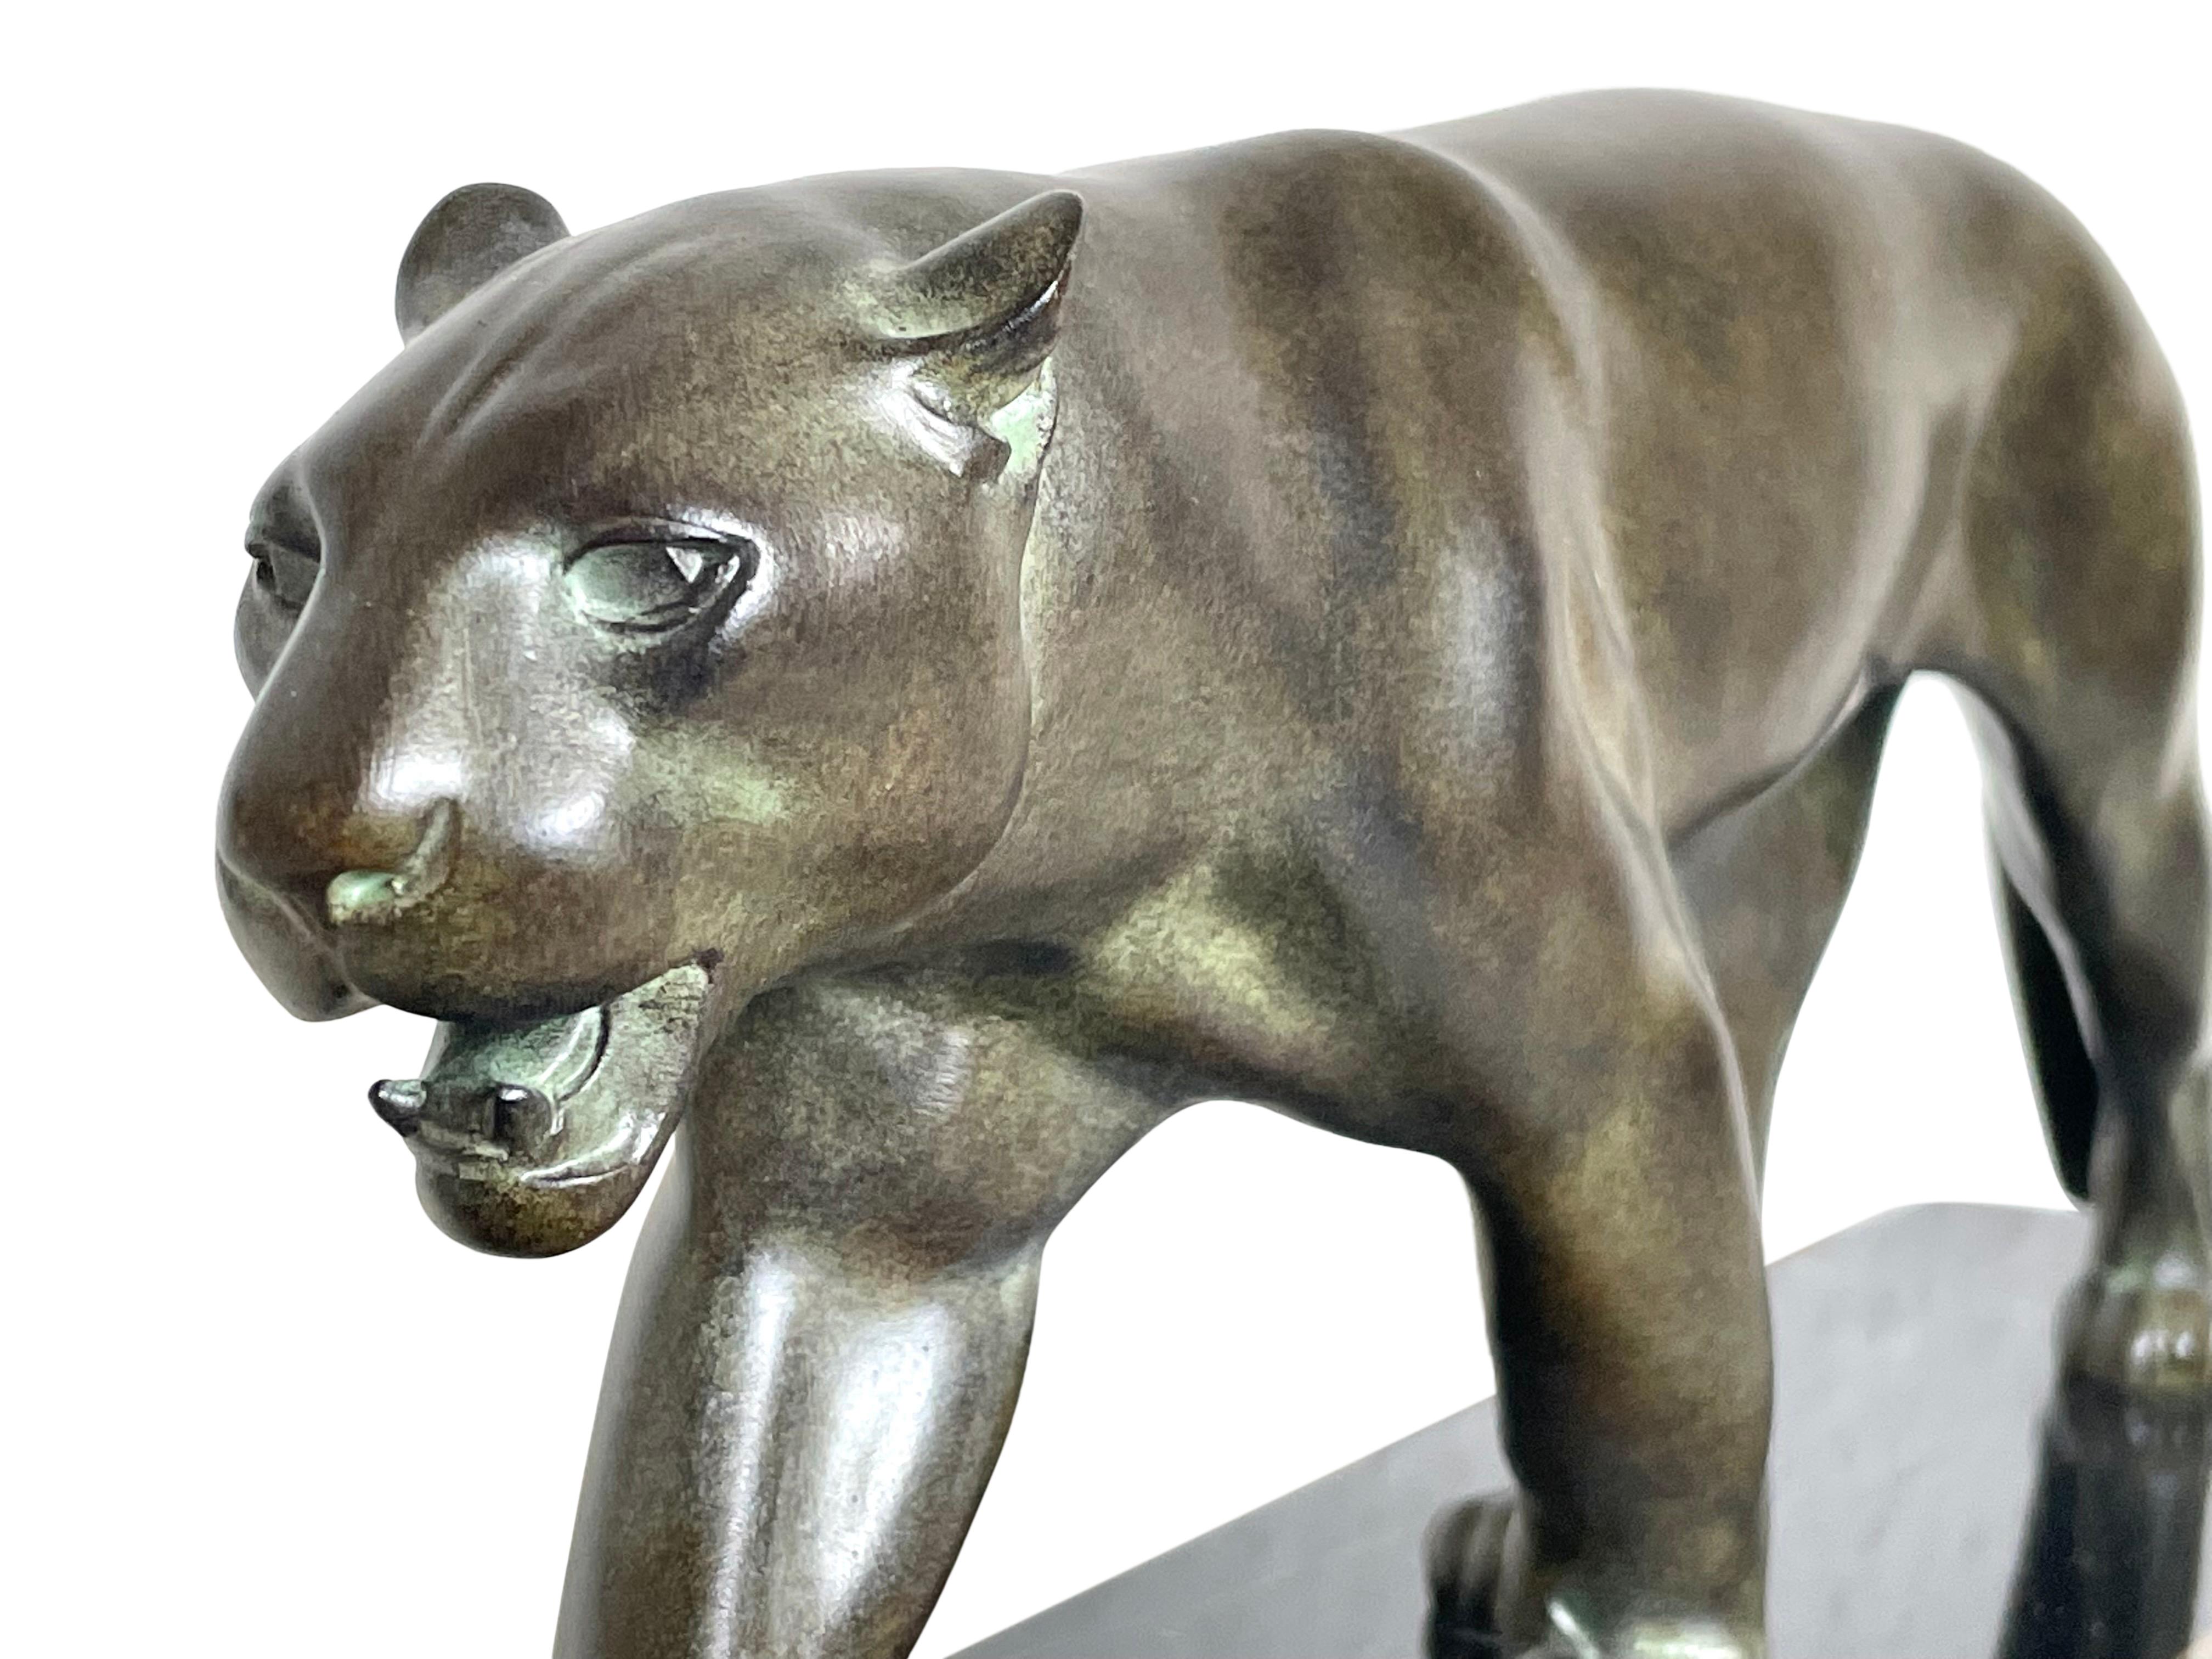 French Ouganda Art Deco Style Panther Sculpture Original Max Le Verrier in Spelter